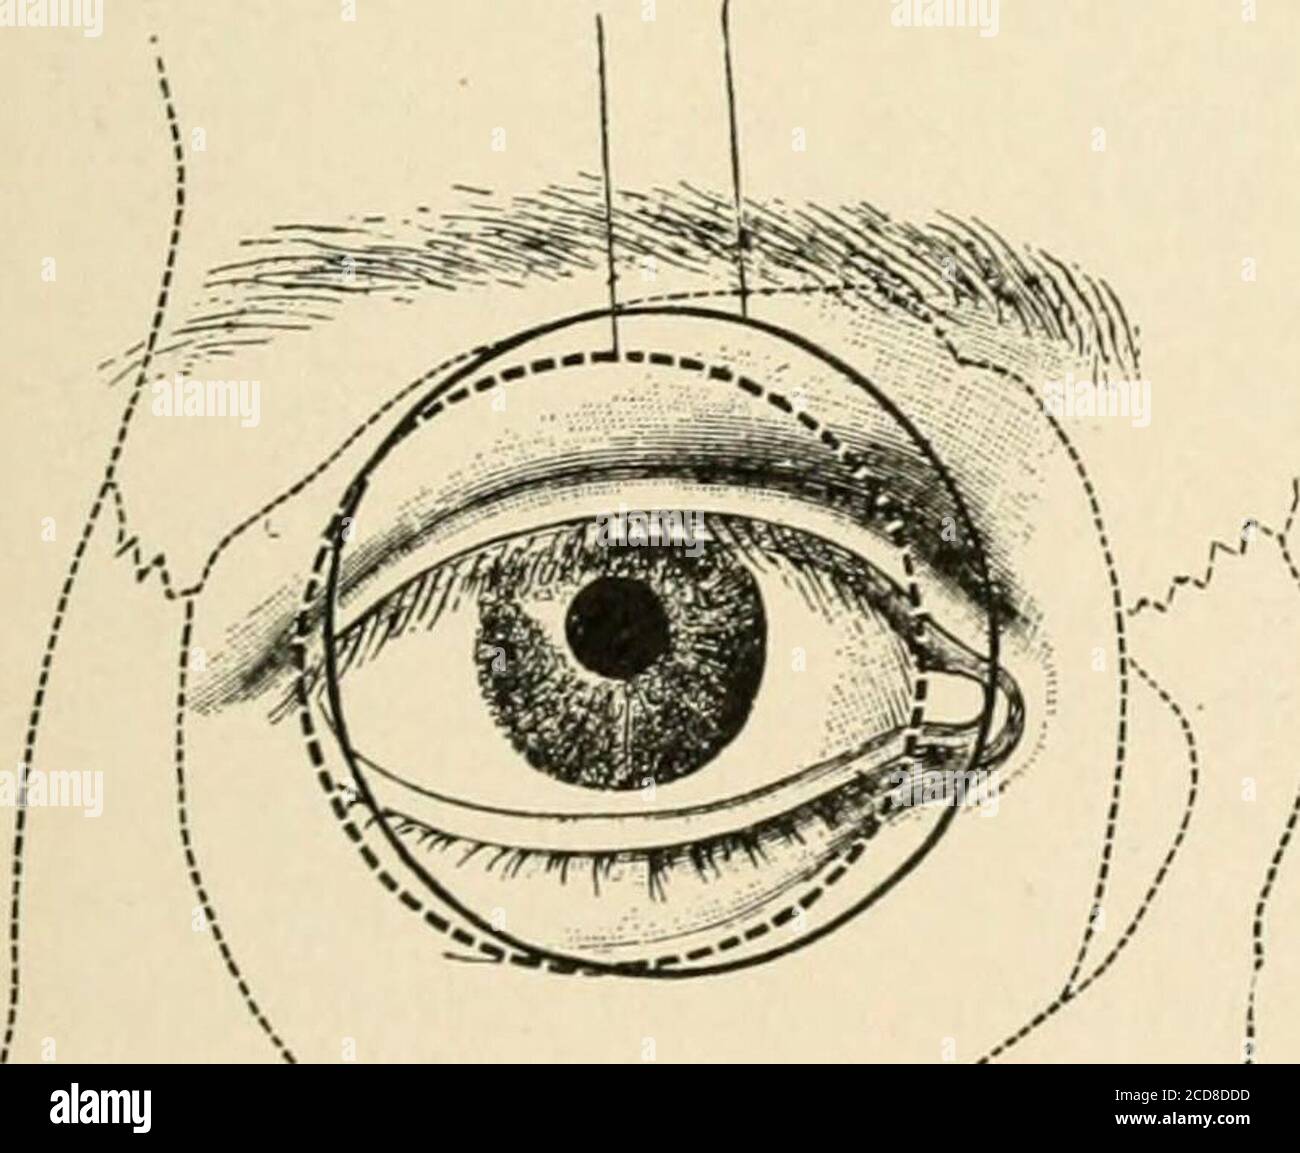 . A treatise on diseases of the eye . Nerves of tlie Oibit and Ophthalmic Ganglion, side view. (Gray.) EYELIDS 43 Fig. 19 narily wide open, from 8 to 14 mm; it frequently Varies in width in thetwo eyes. Temporally the lids approach each other at a sharp angle,forming the external canthus. When the lids are separated, a delicate,thin membrane stretches acrossthis angle, forming the externalcommissure. At the inner angle ofthe lids, internal canthus, the pal-pebral fissure is horseshoe in shape,the ends of the shoe correspondingto the puncta lachrymalia. Puncta Lachrymalia.—The punctalachrymalia Stock Photo